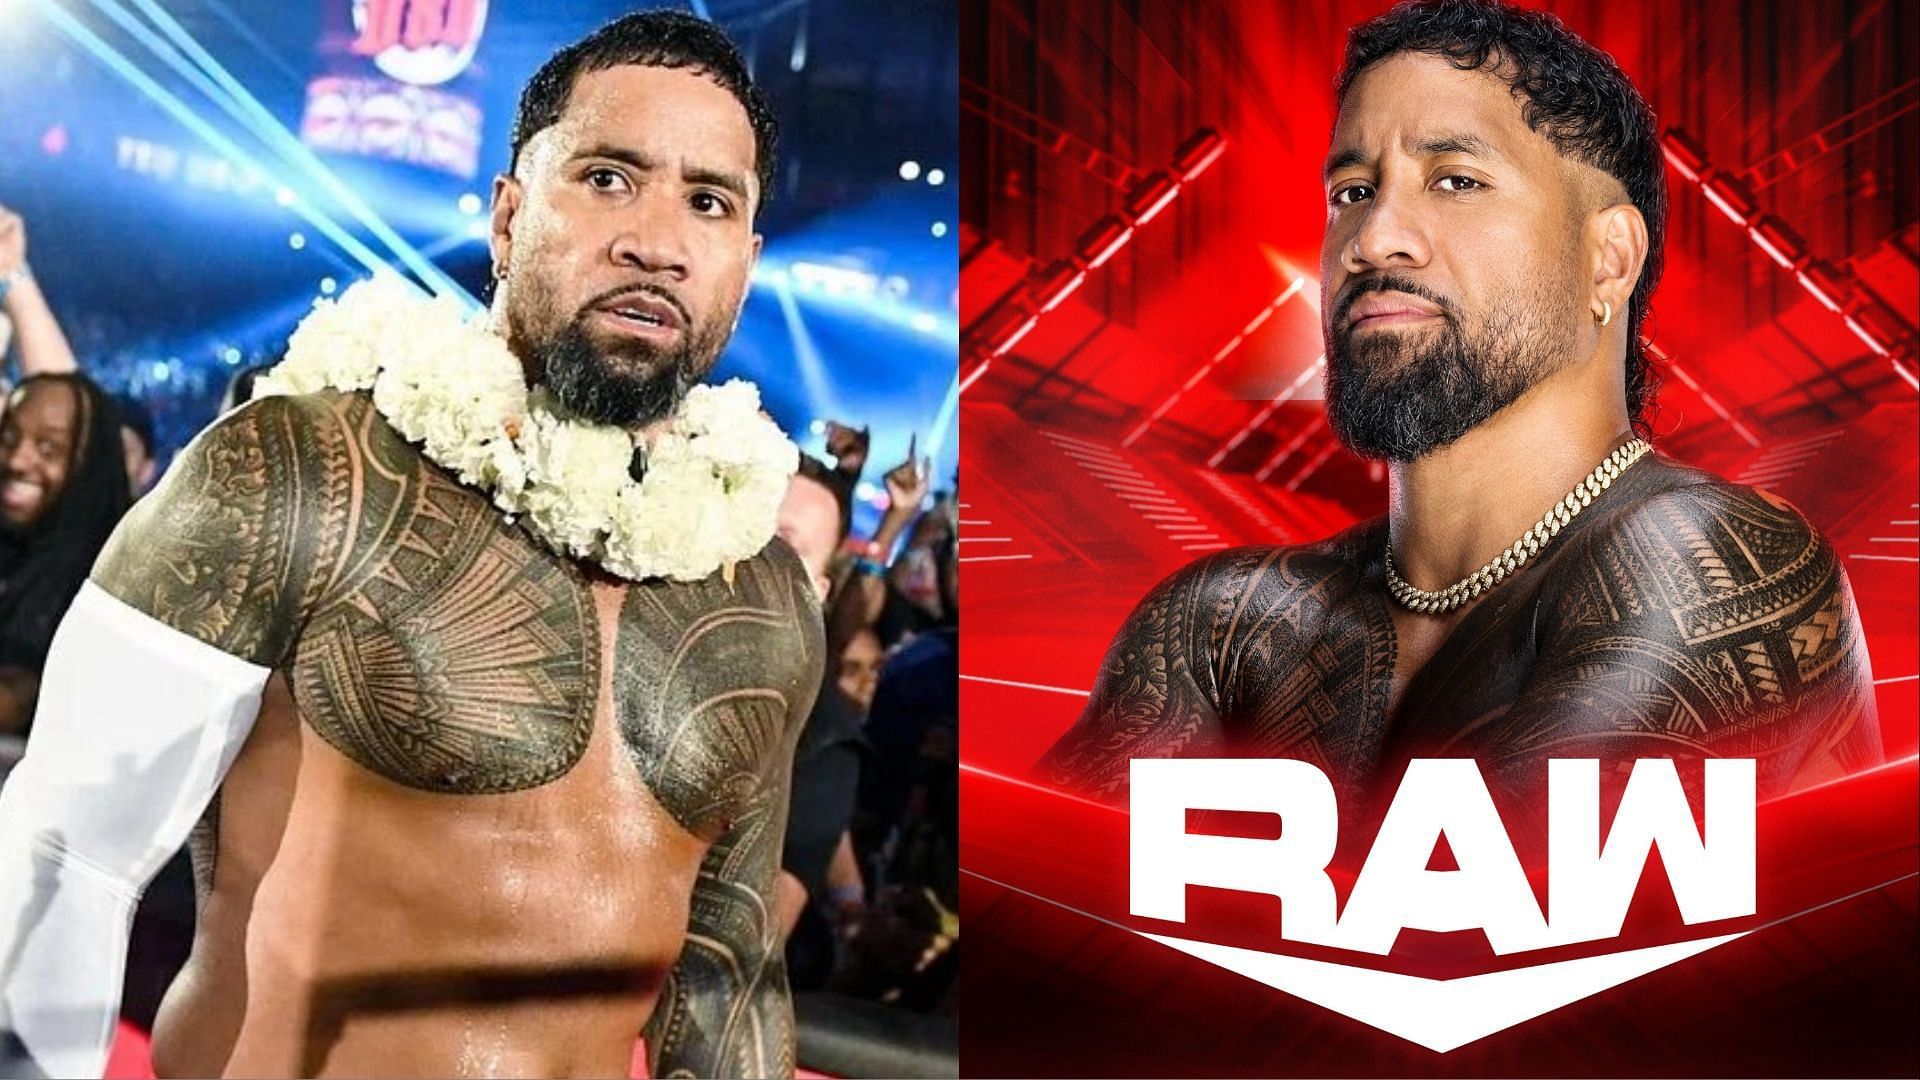 Jey Uso is now a part of WWE RAW roster.